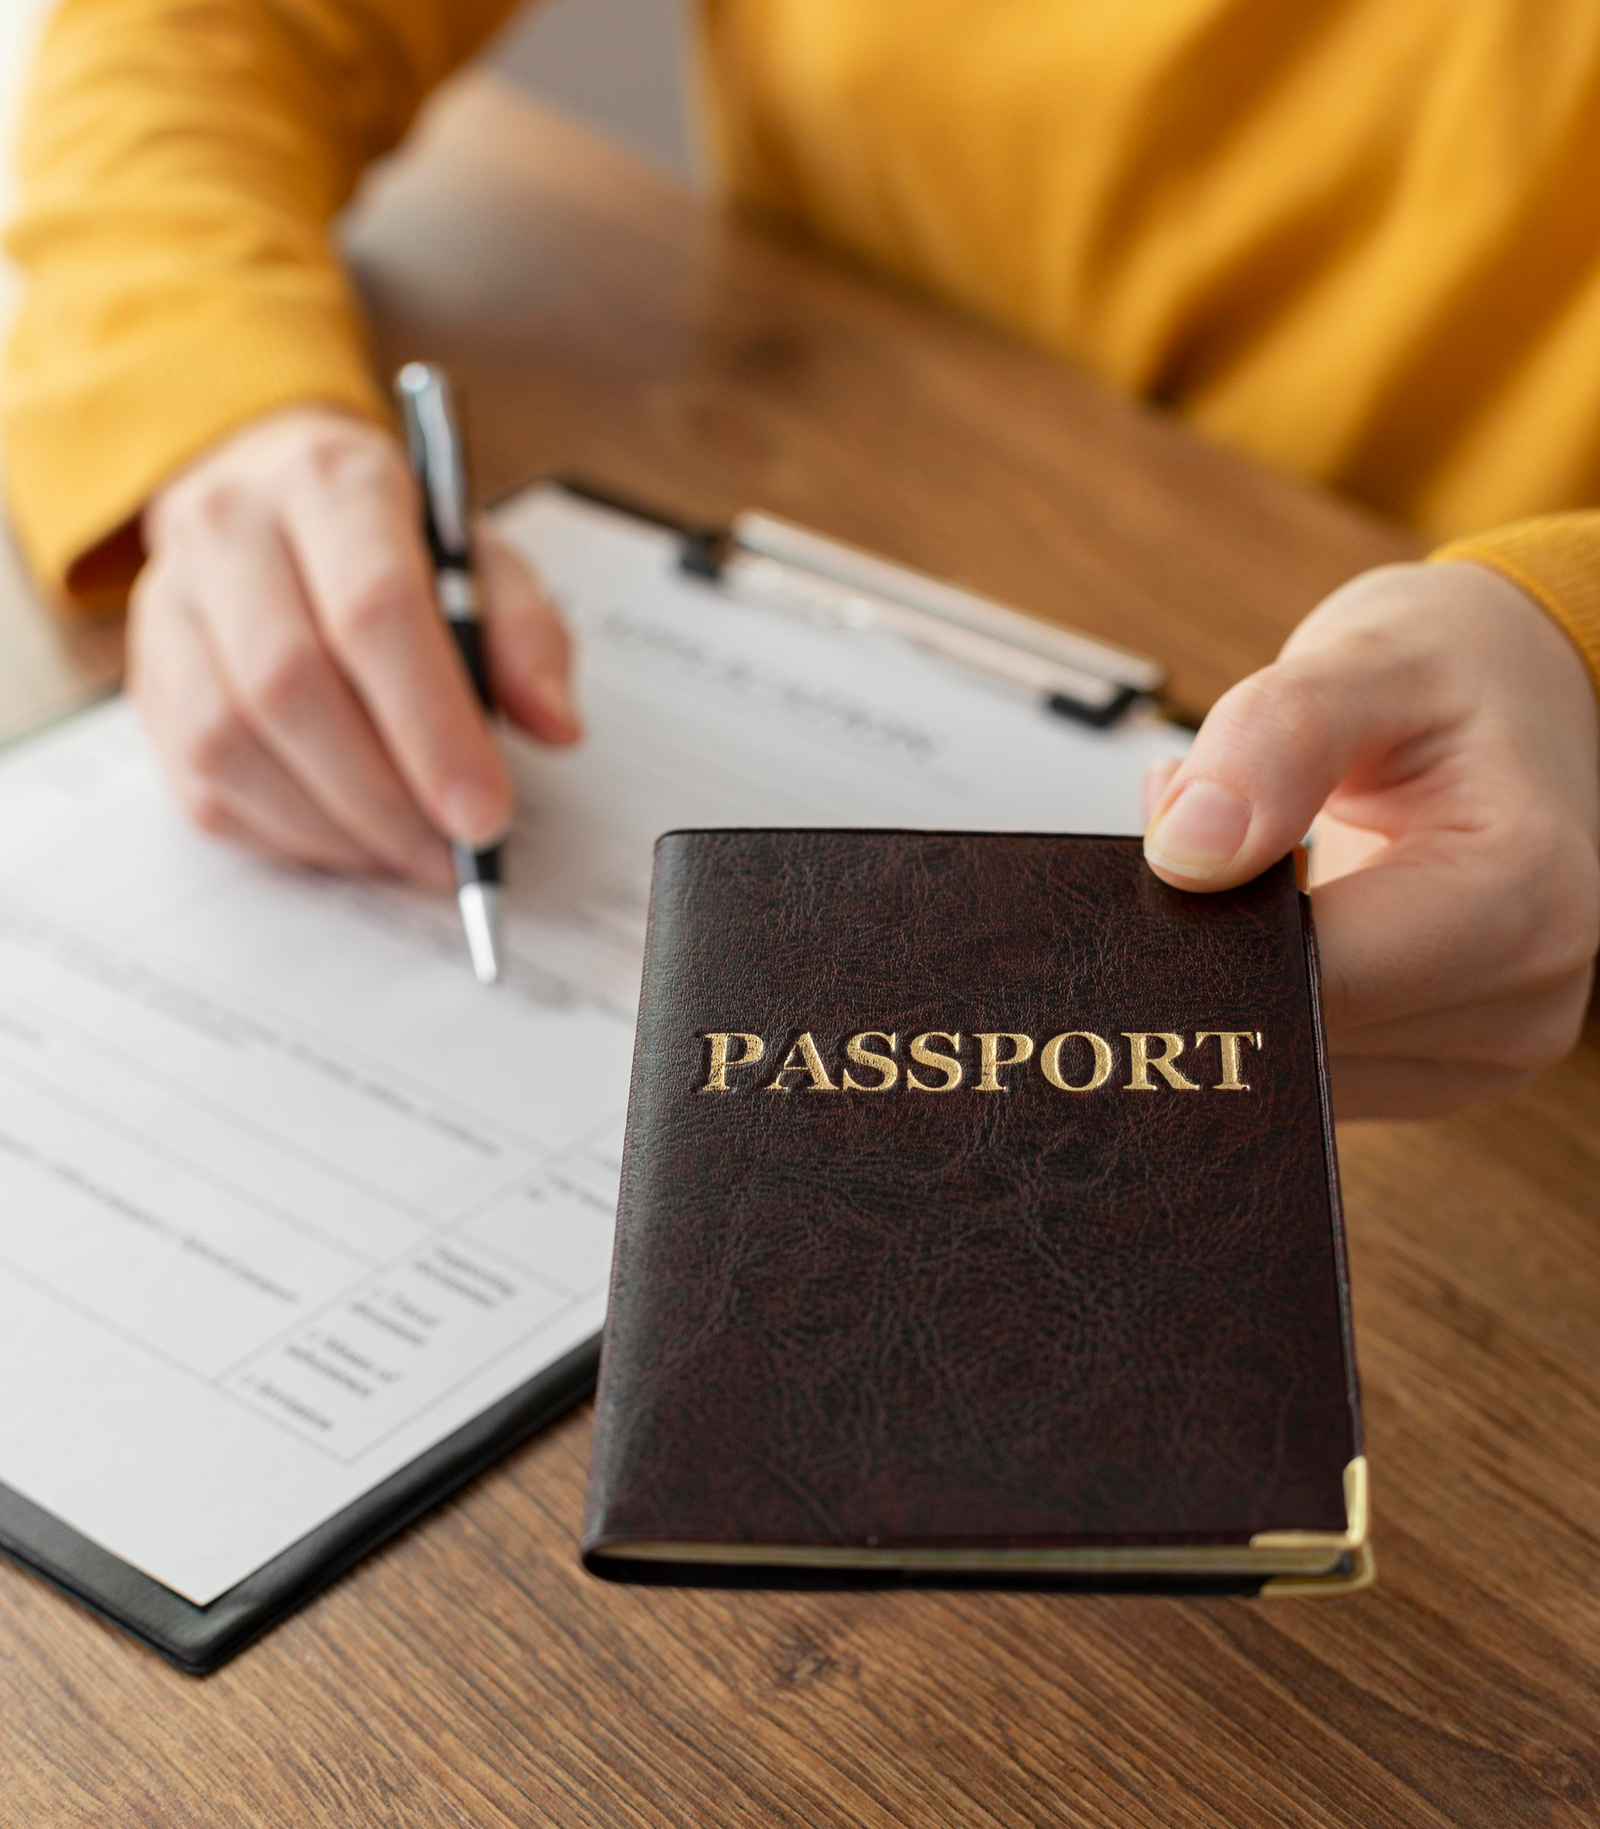 visa-application-composition-with-passport